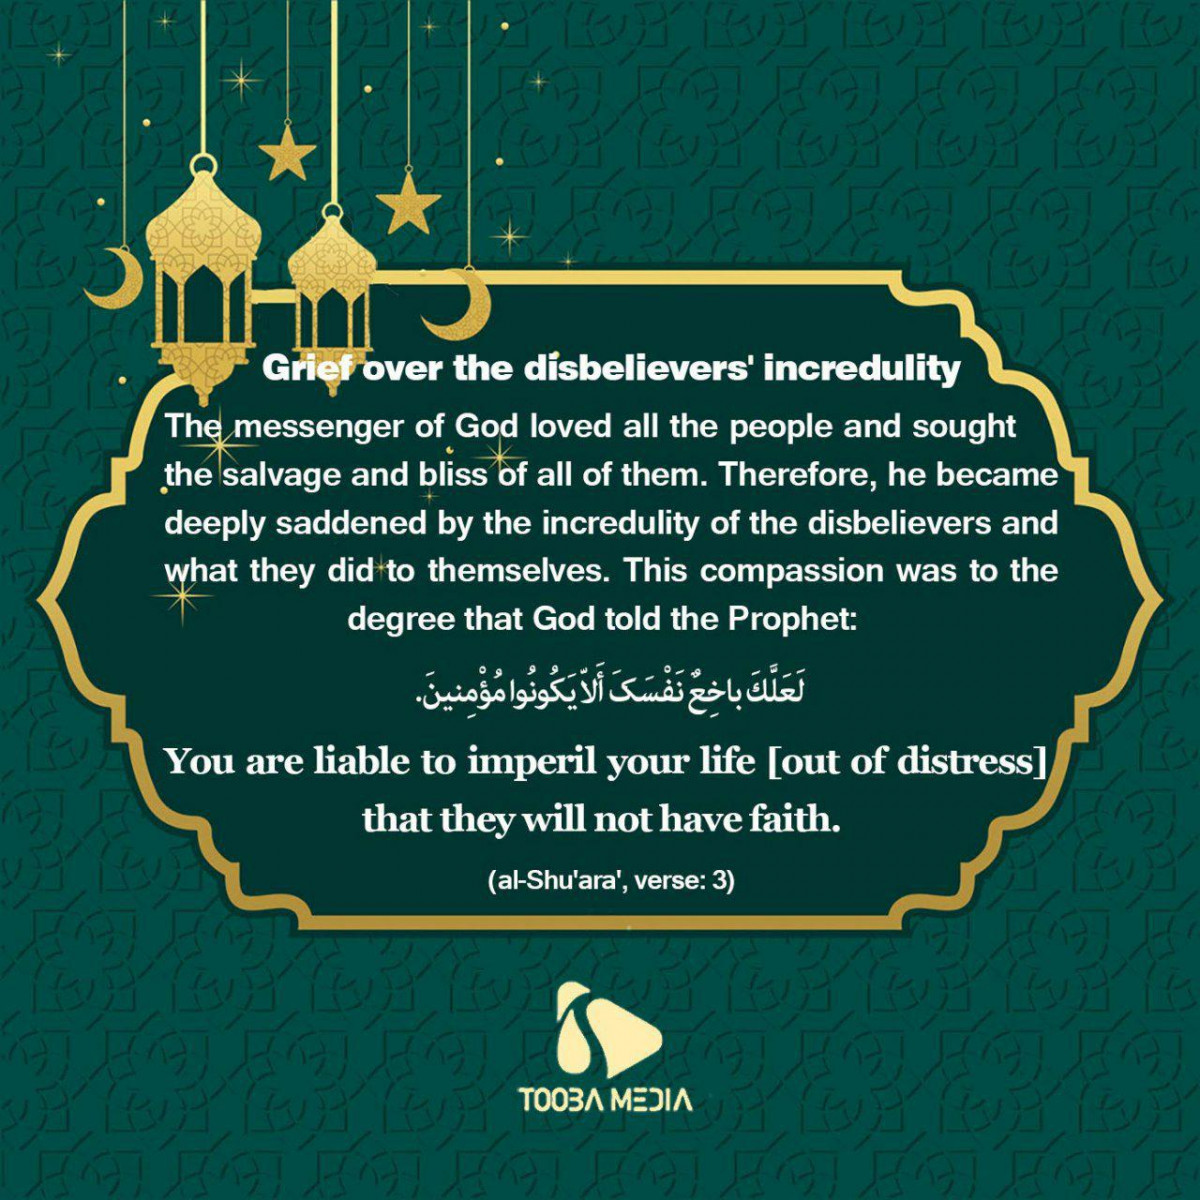 Grief over the disbelievers' incredulity